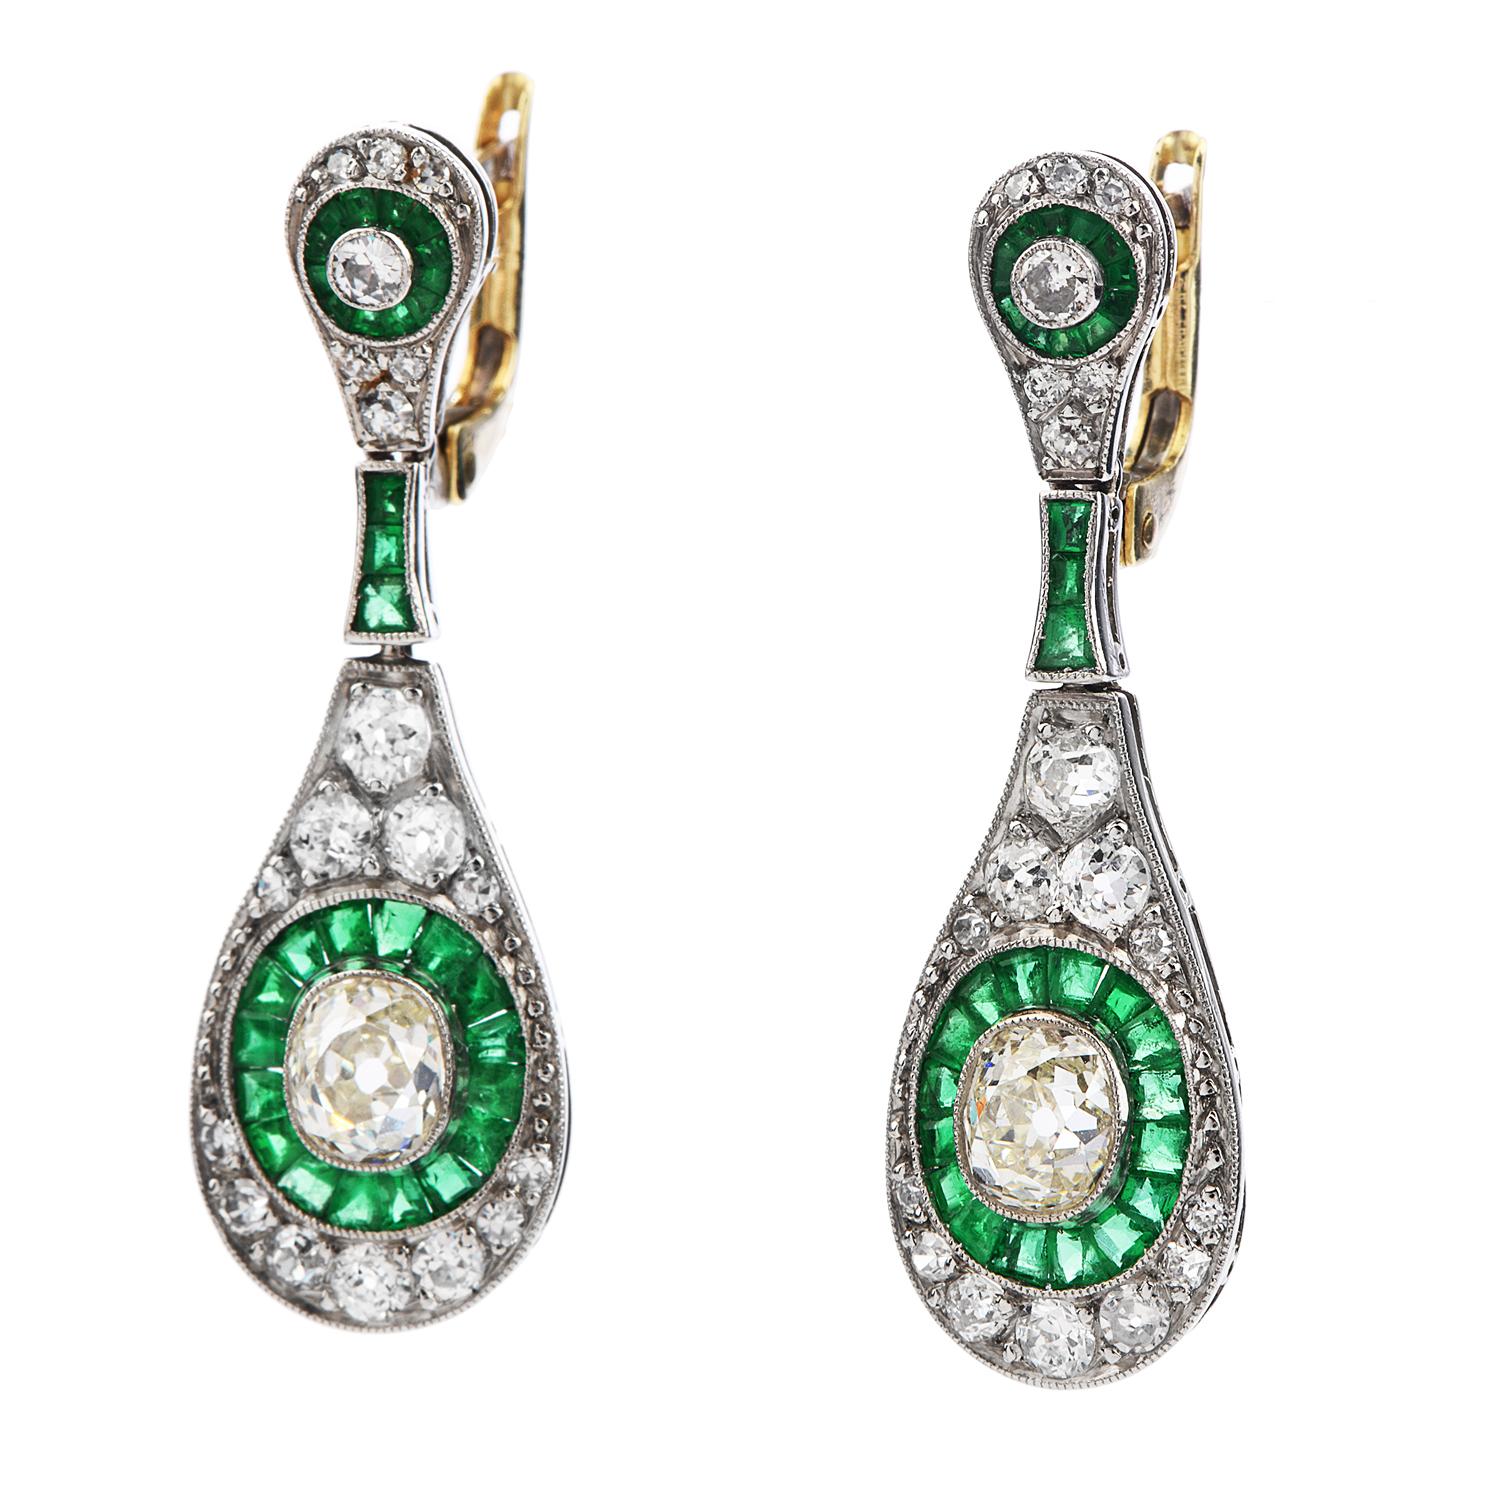 Be stunning with these Diamond & Emerald Platinum  Drop Dangle Earrings!  

These vinatge earrings are crafted in platinum and weigh in a total of 6.0 grams and measure 30mm long by 10 millimeters wide.  

There are 2 genuine old